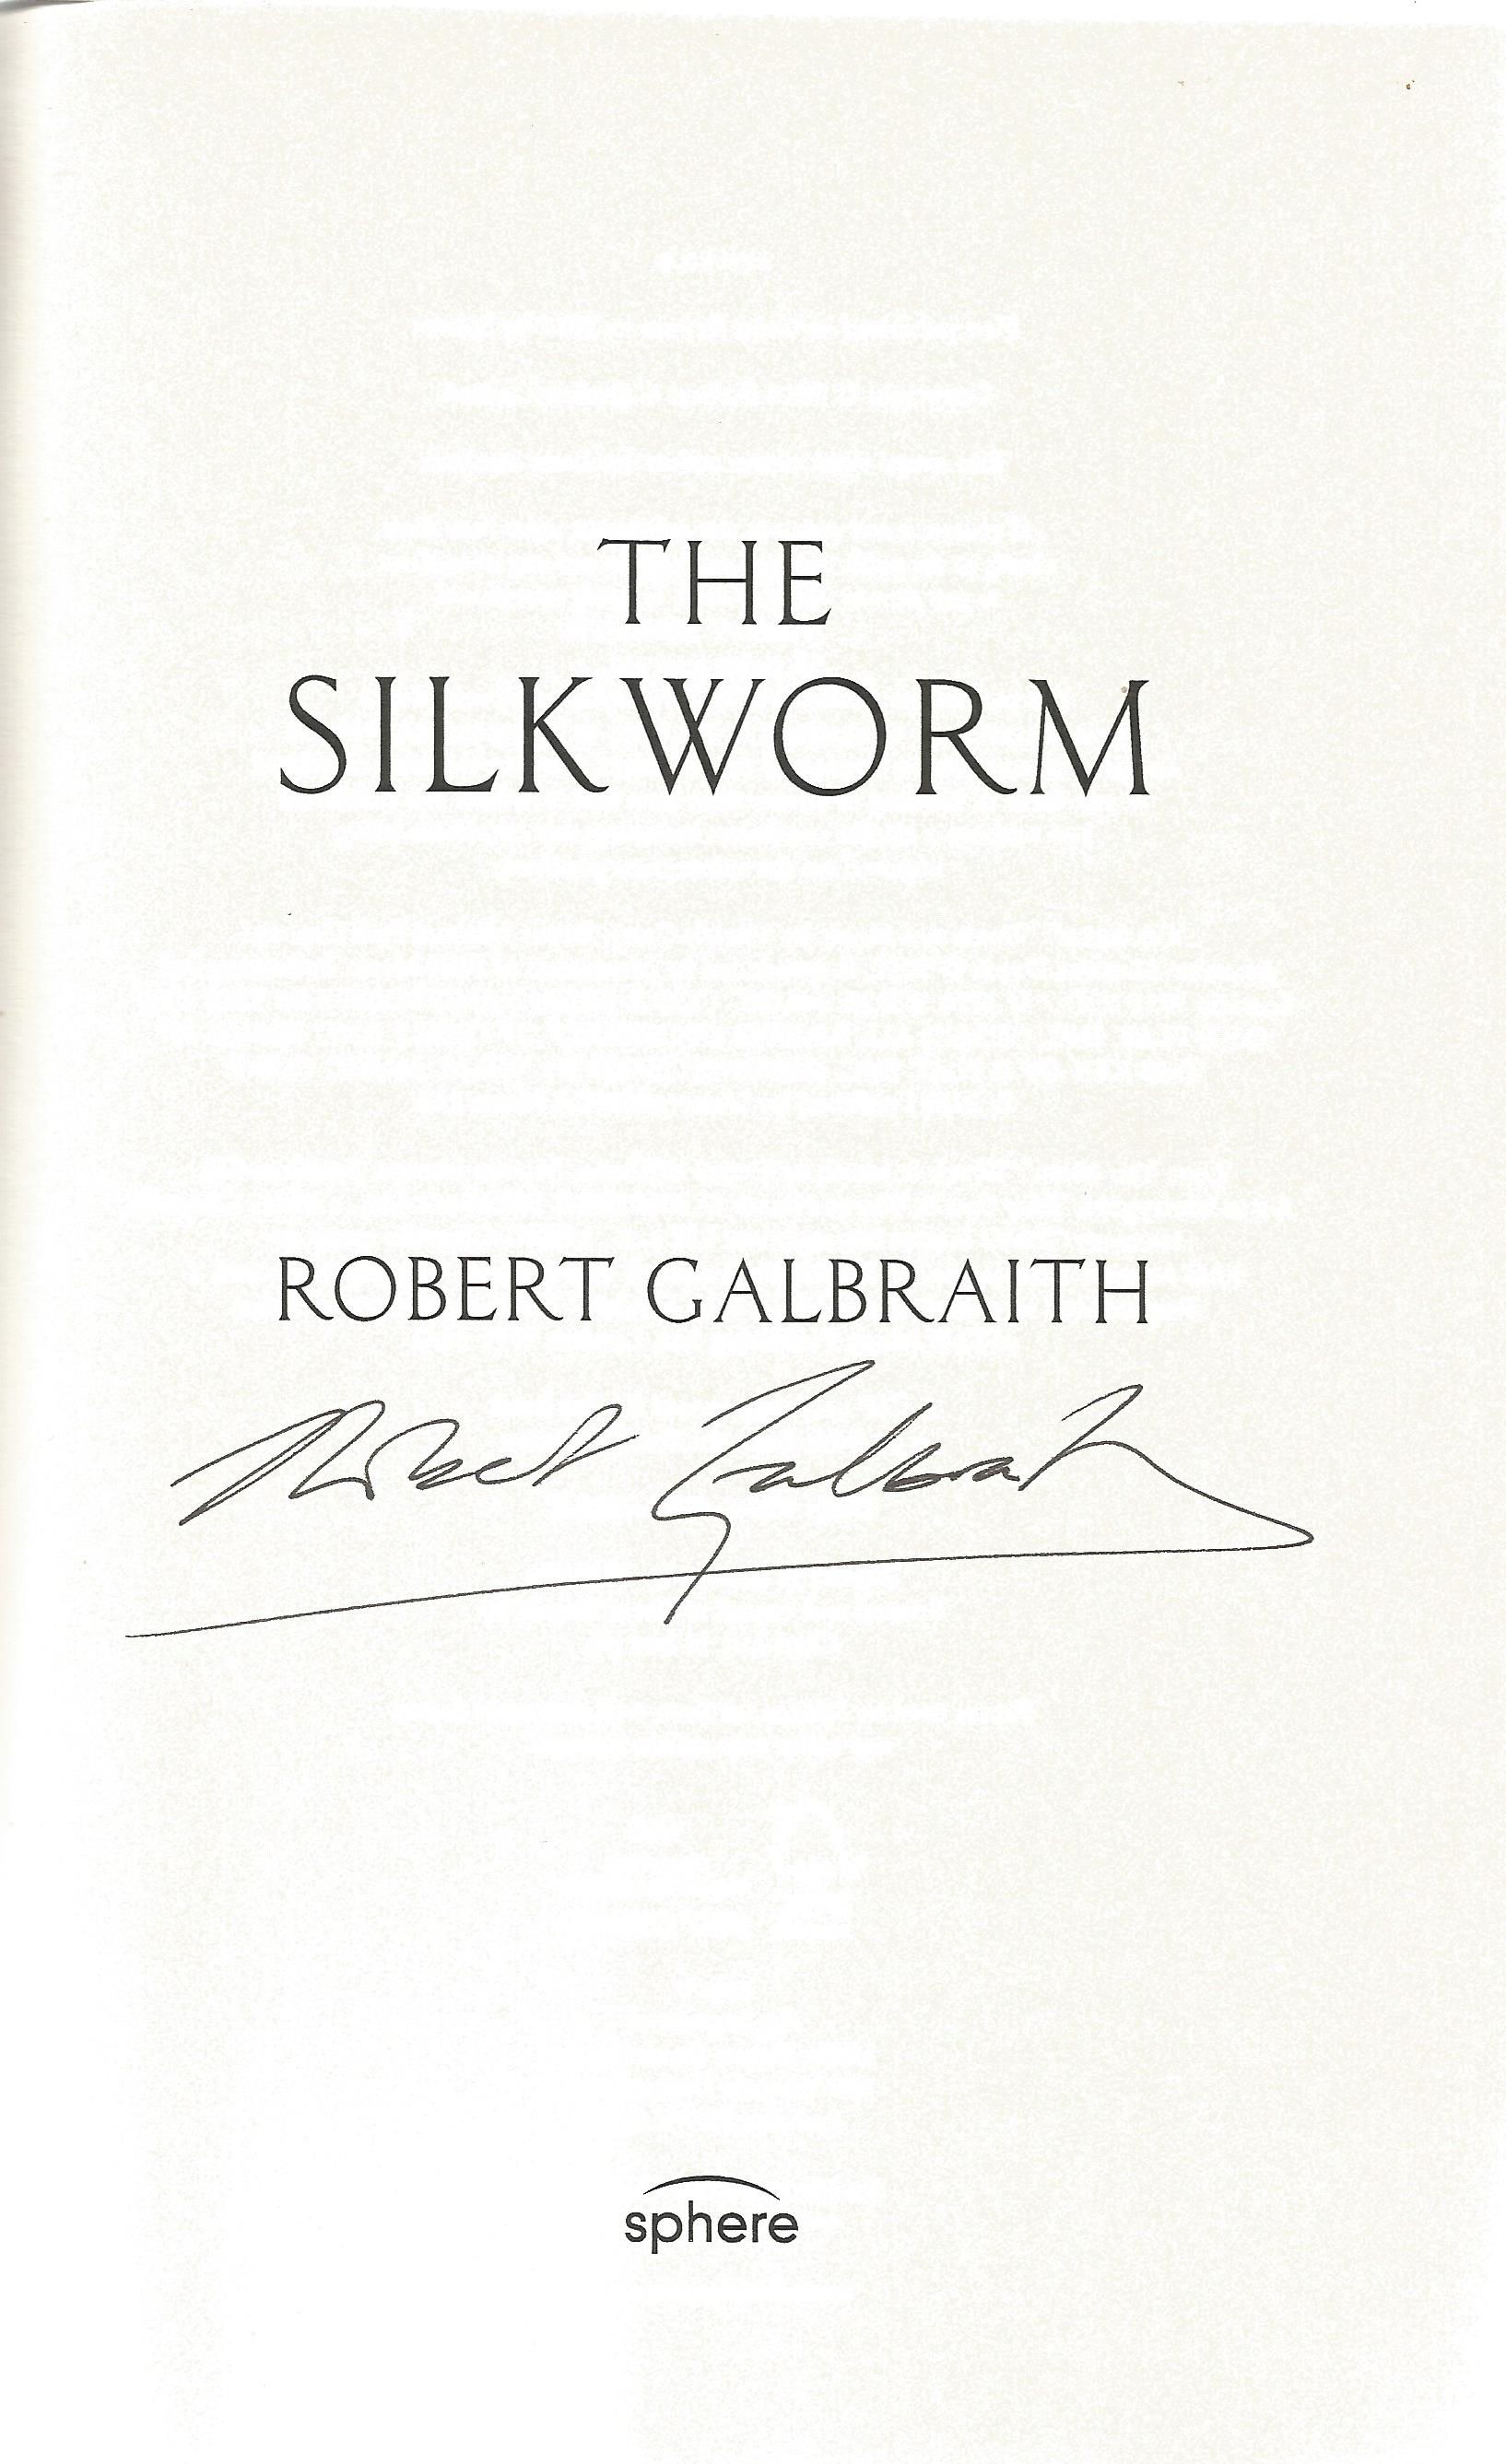 The Silkworm hardback book First Edition signed on the inside title page by the author Robert - Image 2 of 3